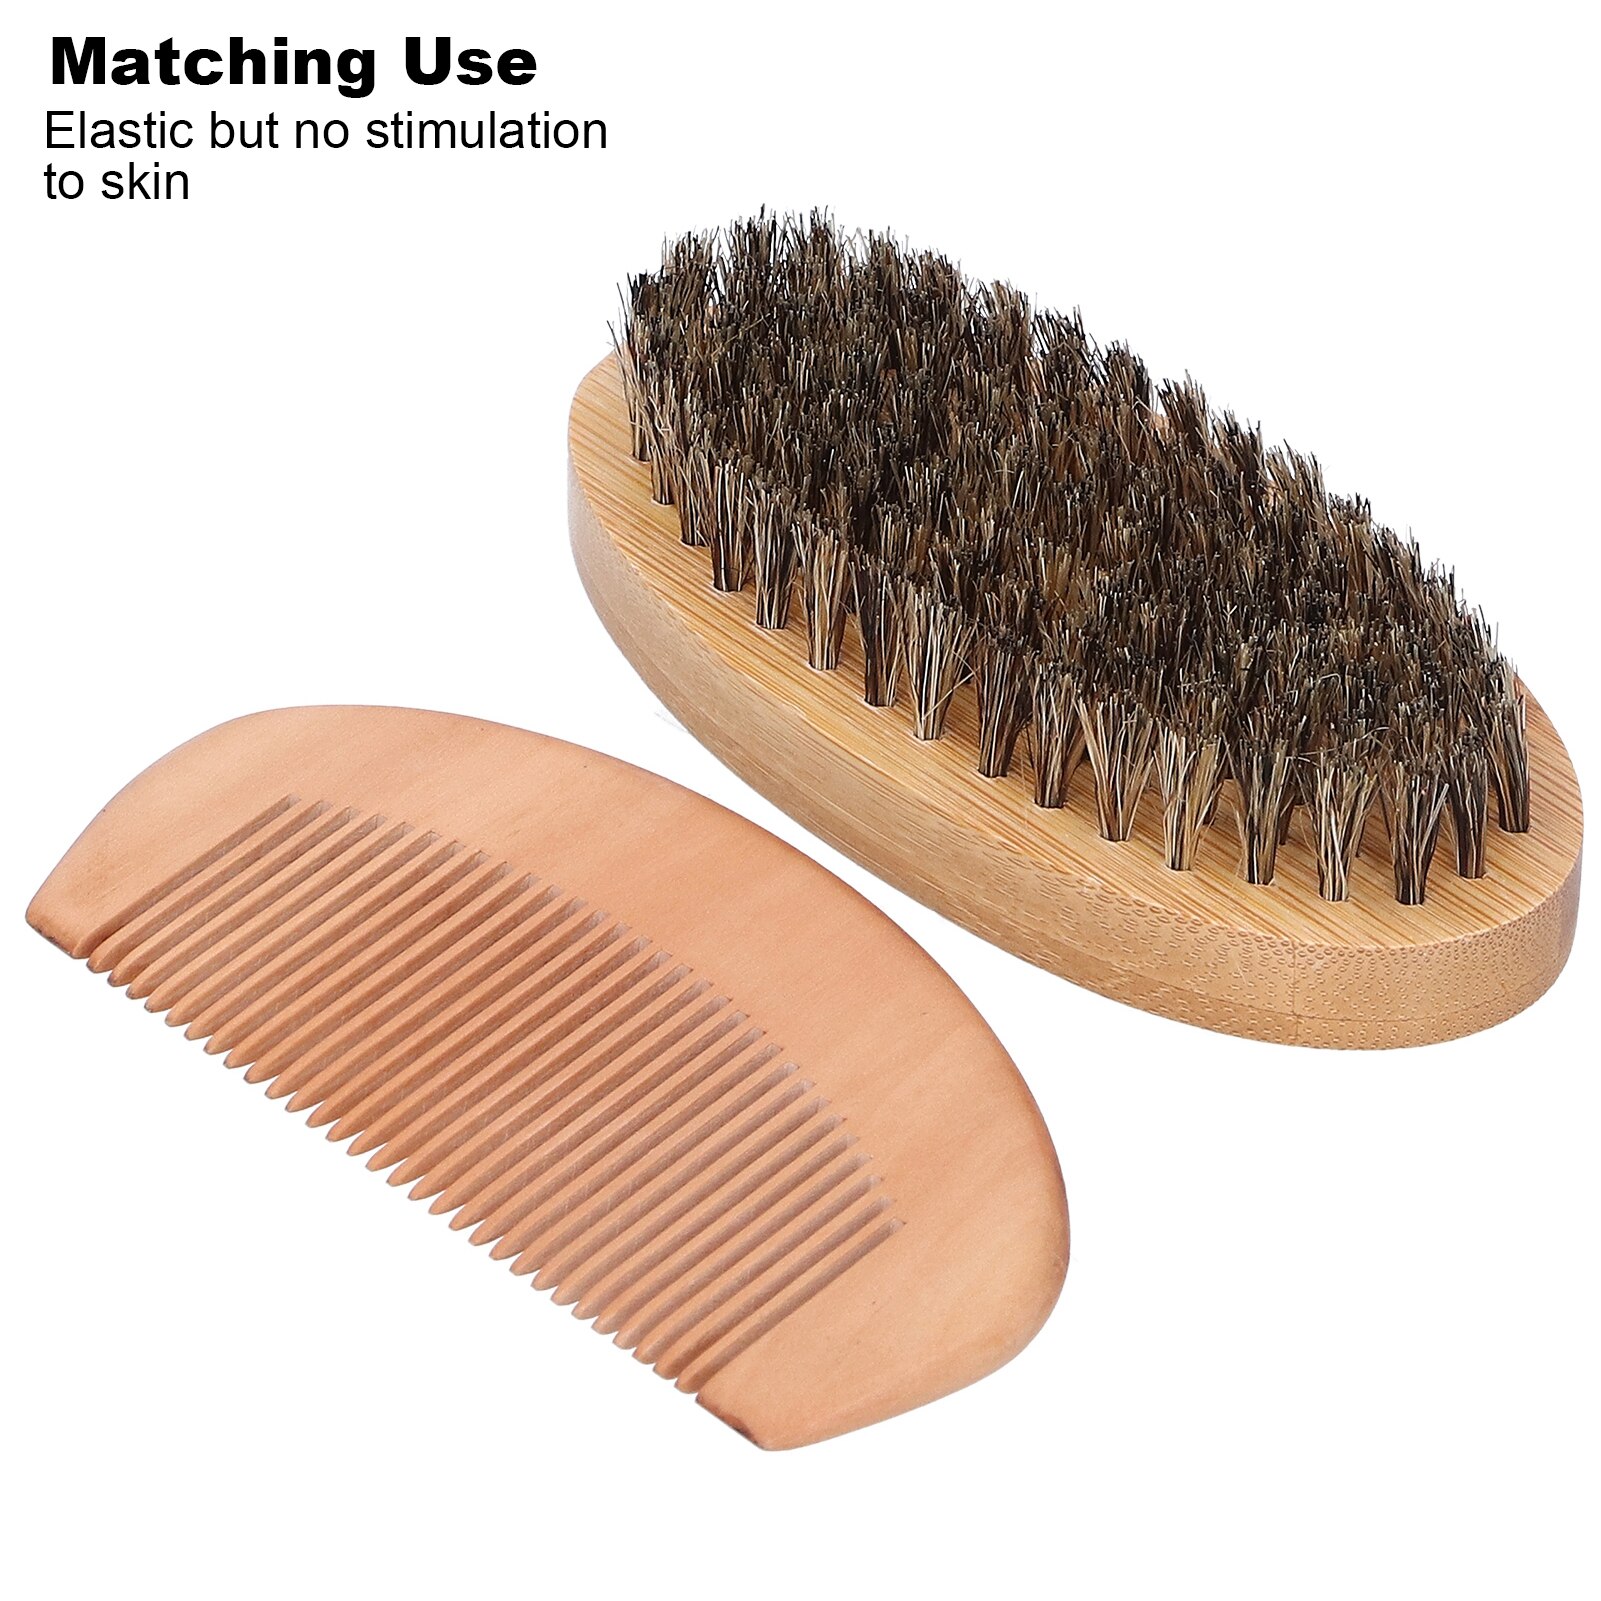 Mens Aftershave Male Care Men Beard Grooming Kit Mustache Oval Brush and Beard Massage Comb Wooden Bristle Beard Balm Male